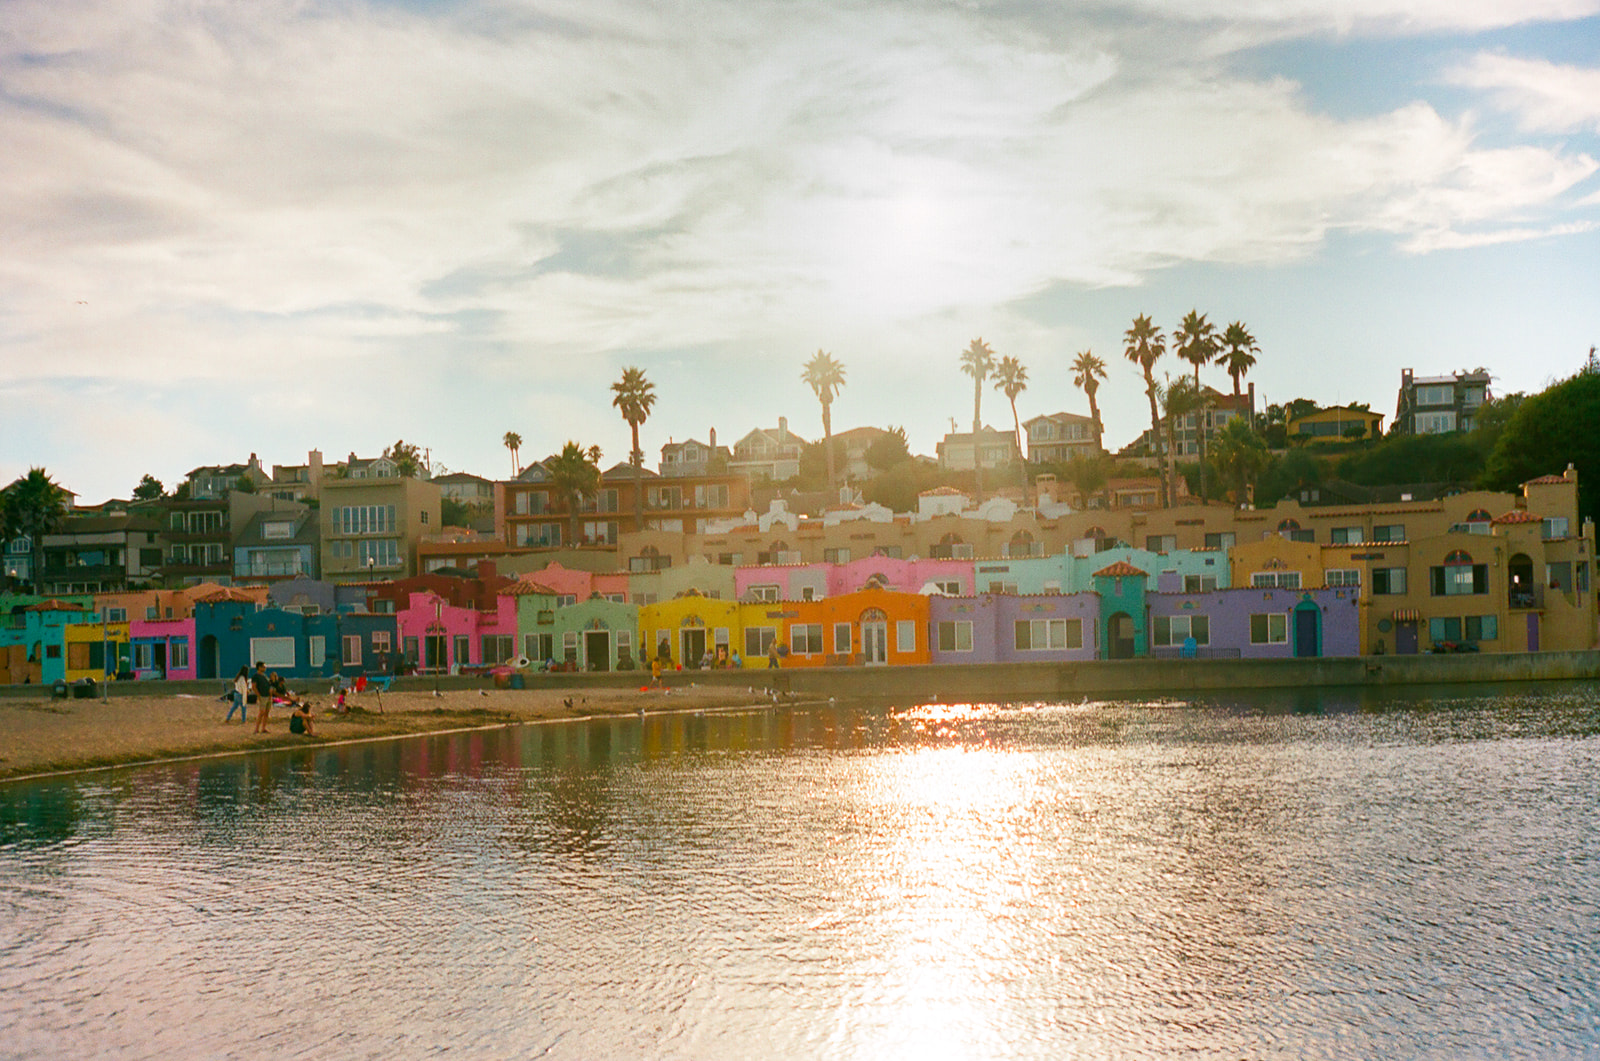 Capitola, CA 35 mm film photography captured by Laura Jaeger Photography